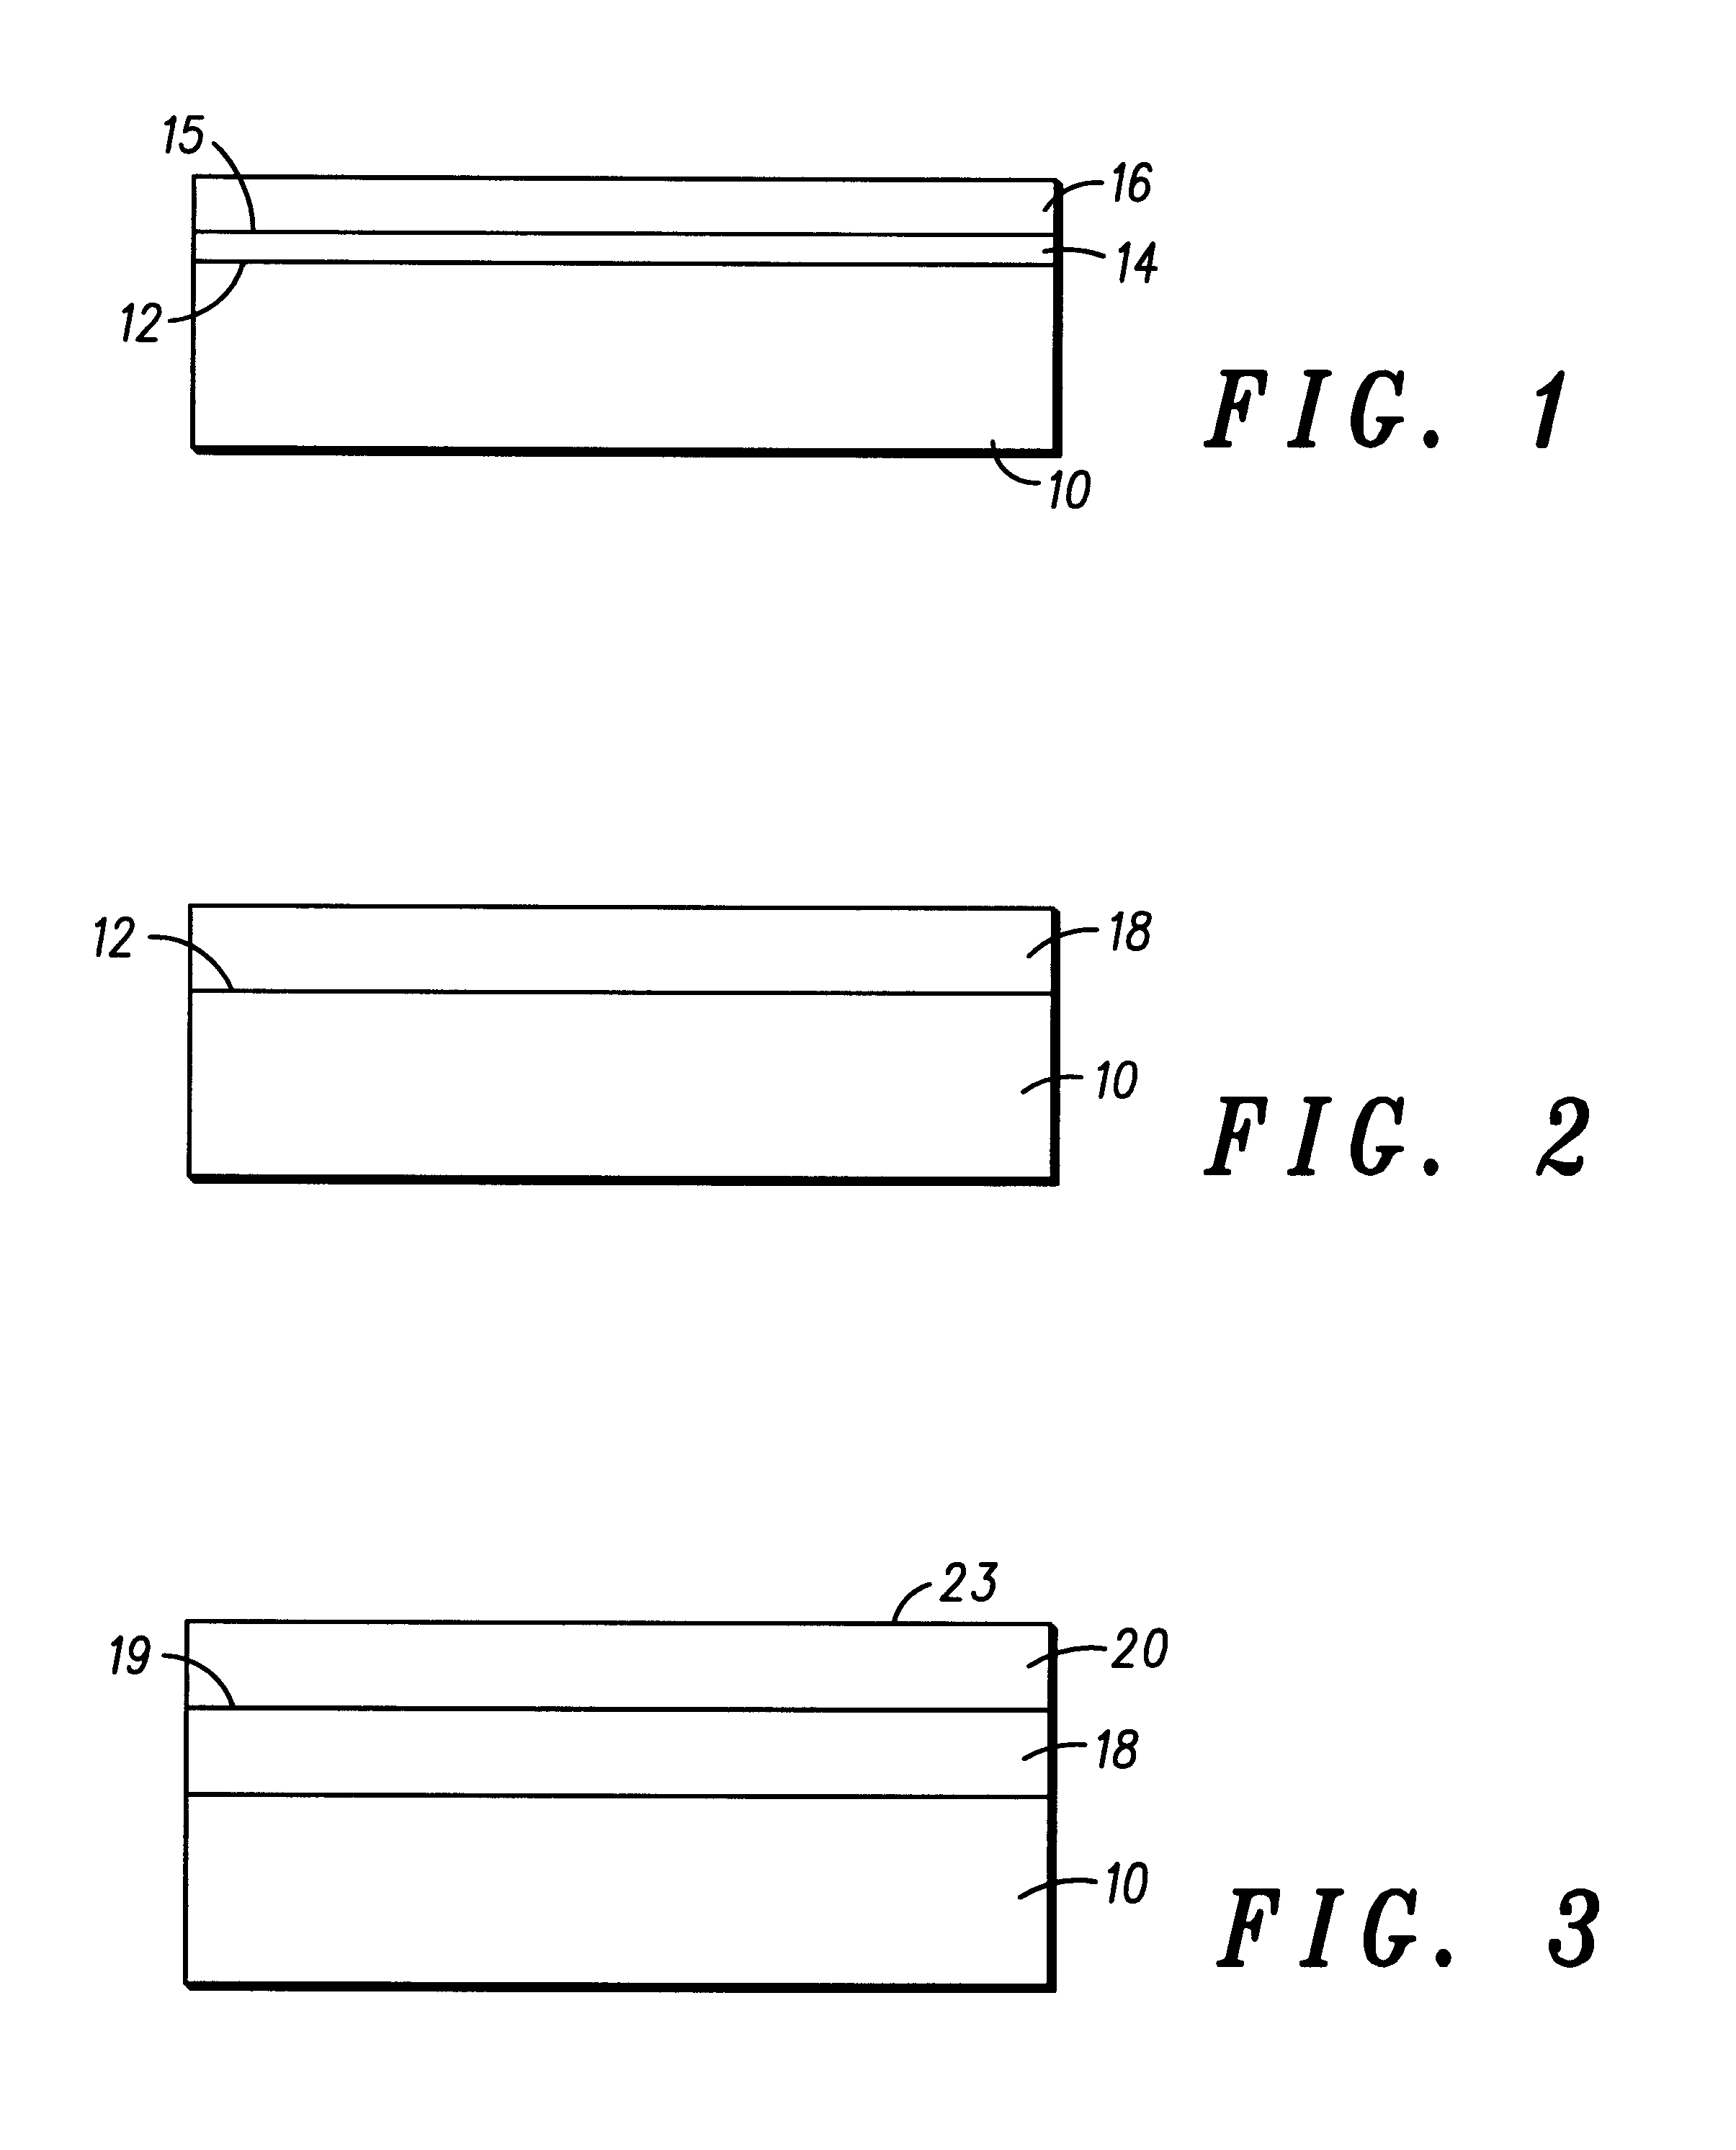 Method for fabricating a semiconductor structure with reduced leakage current density